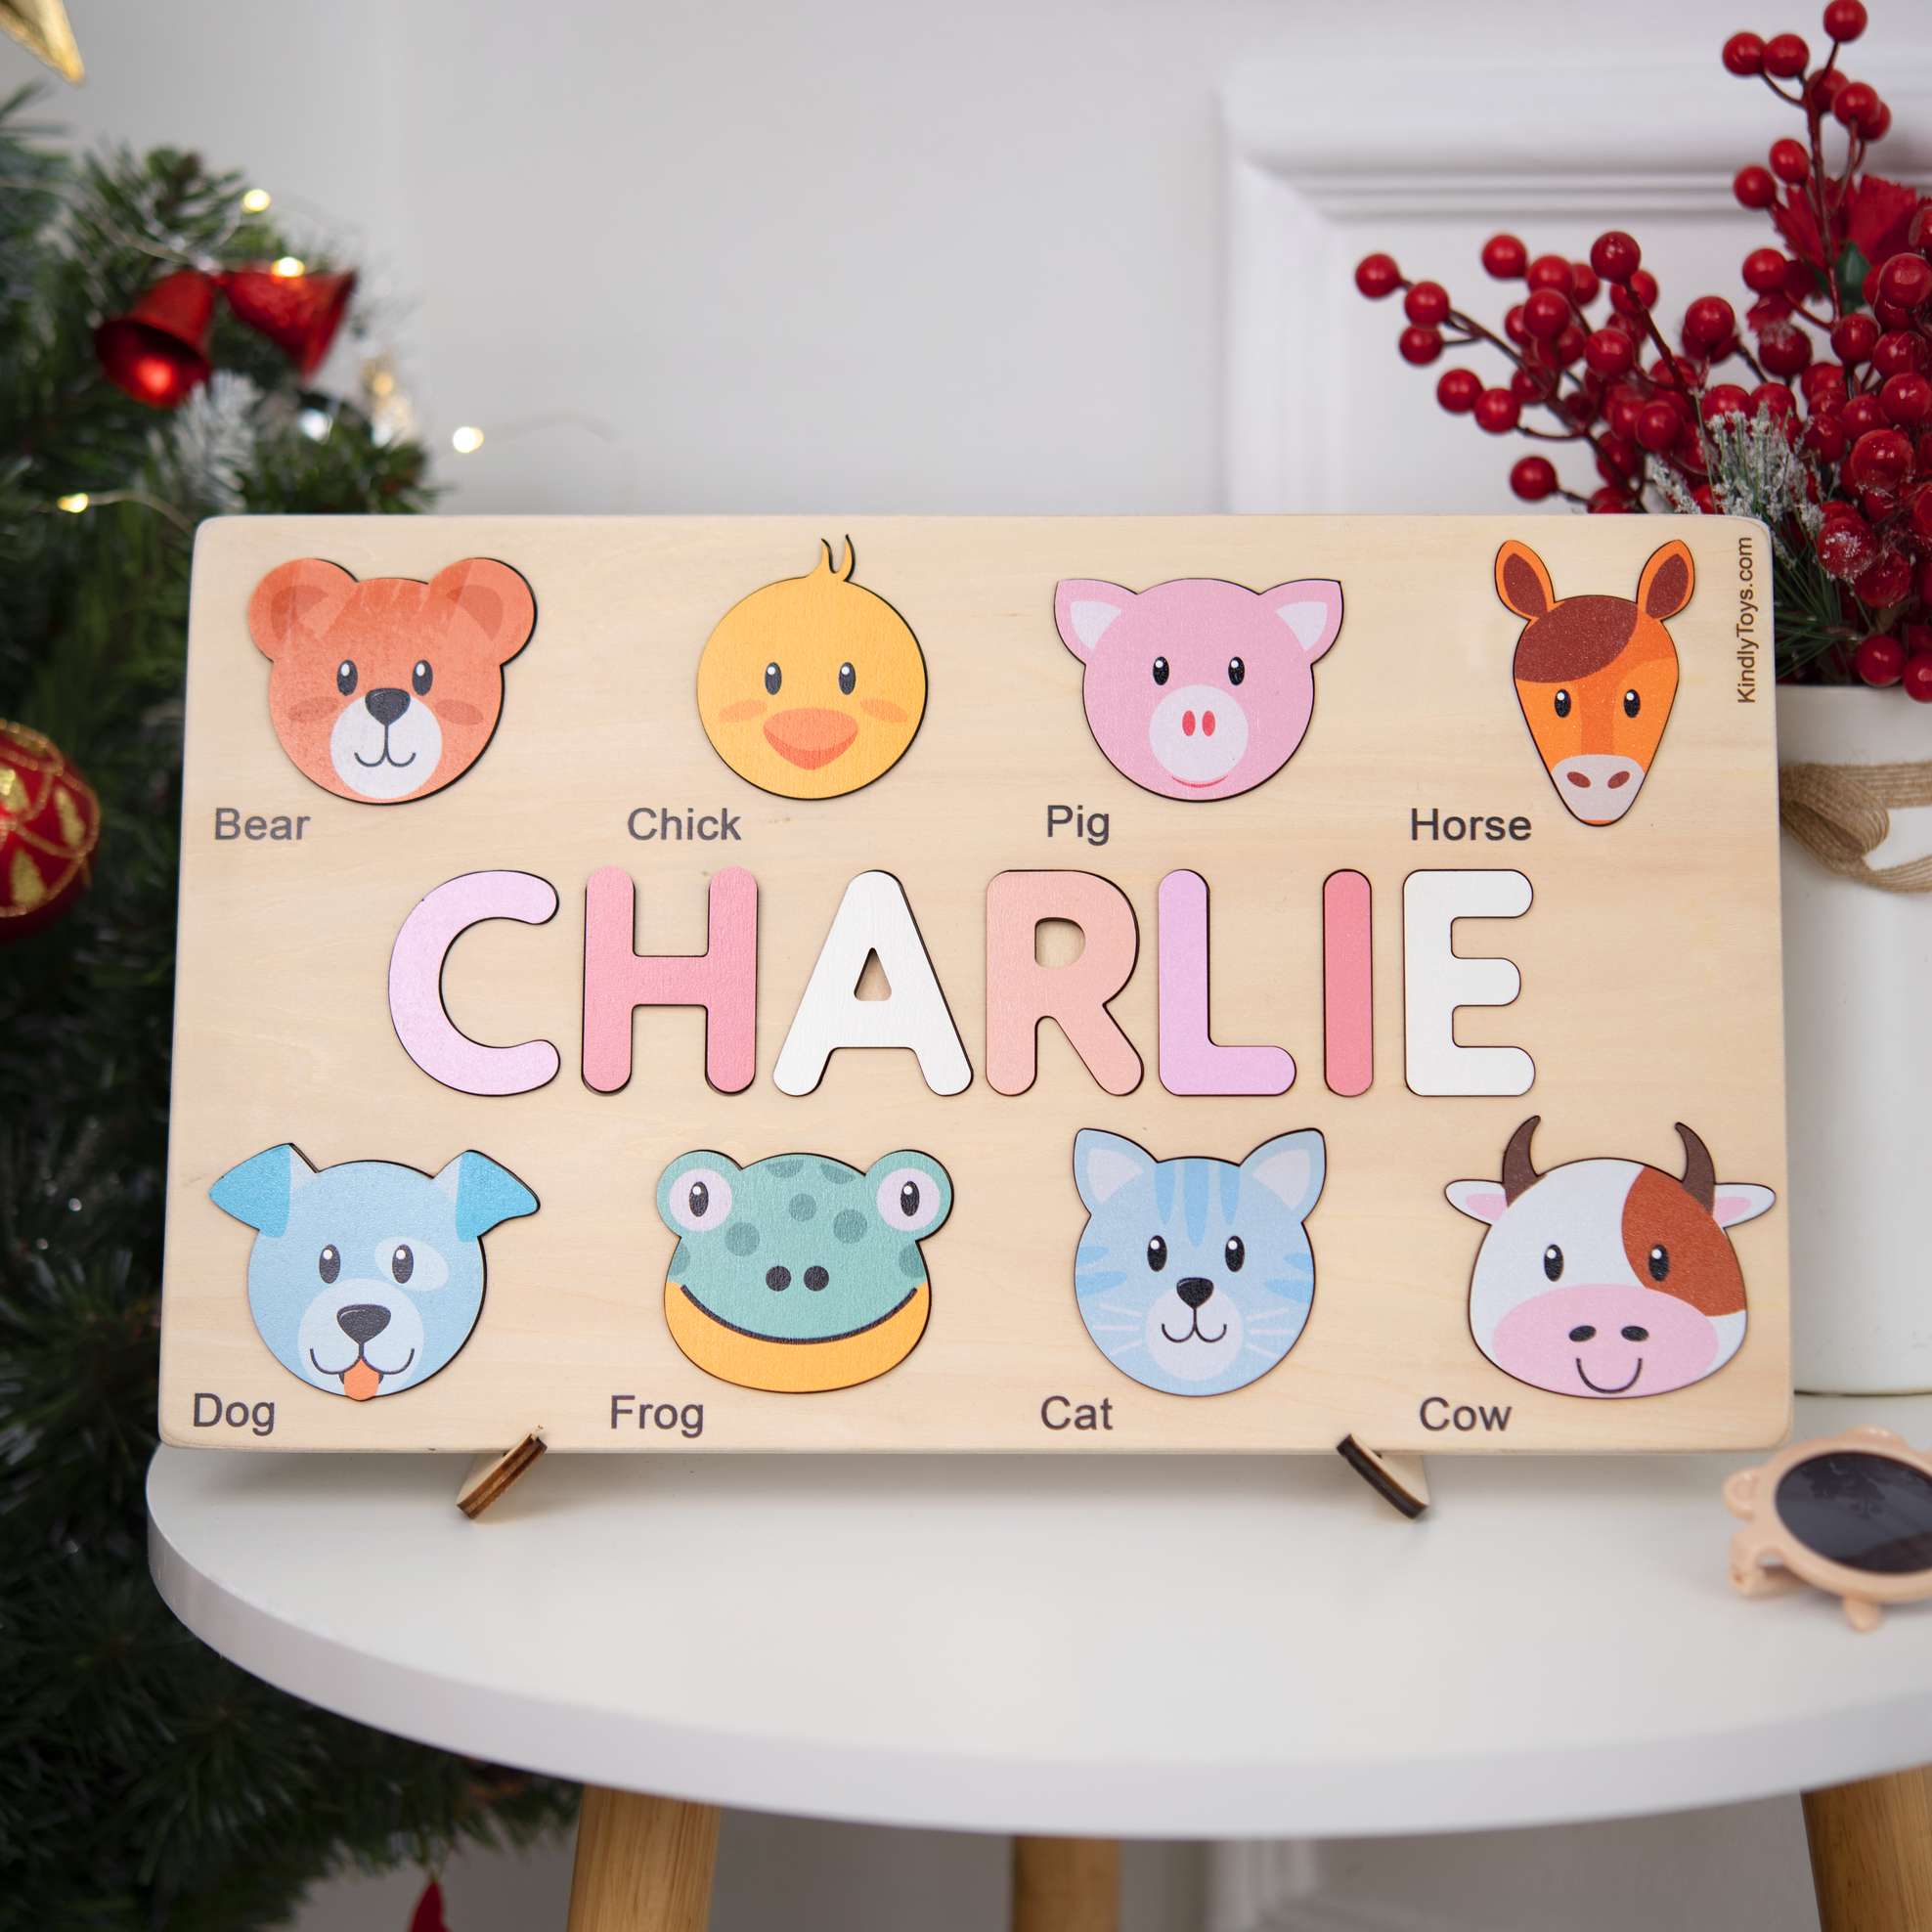 Cute Big Head Animals Personalized Name Puzzle - Wooden Montessori Toys | KindlyToys